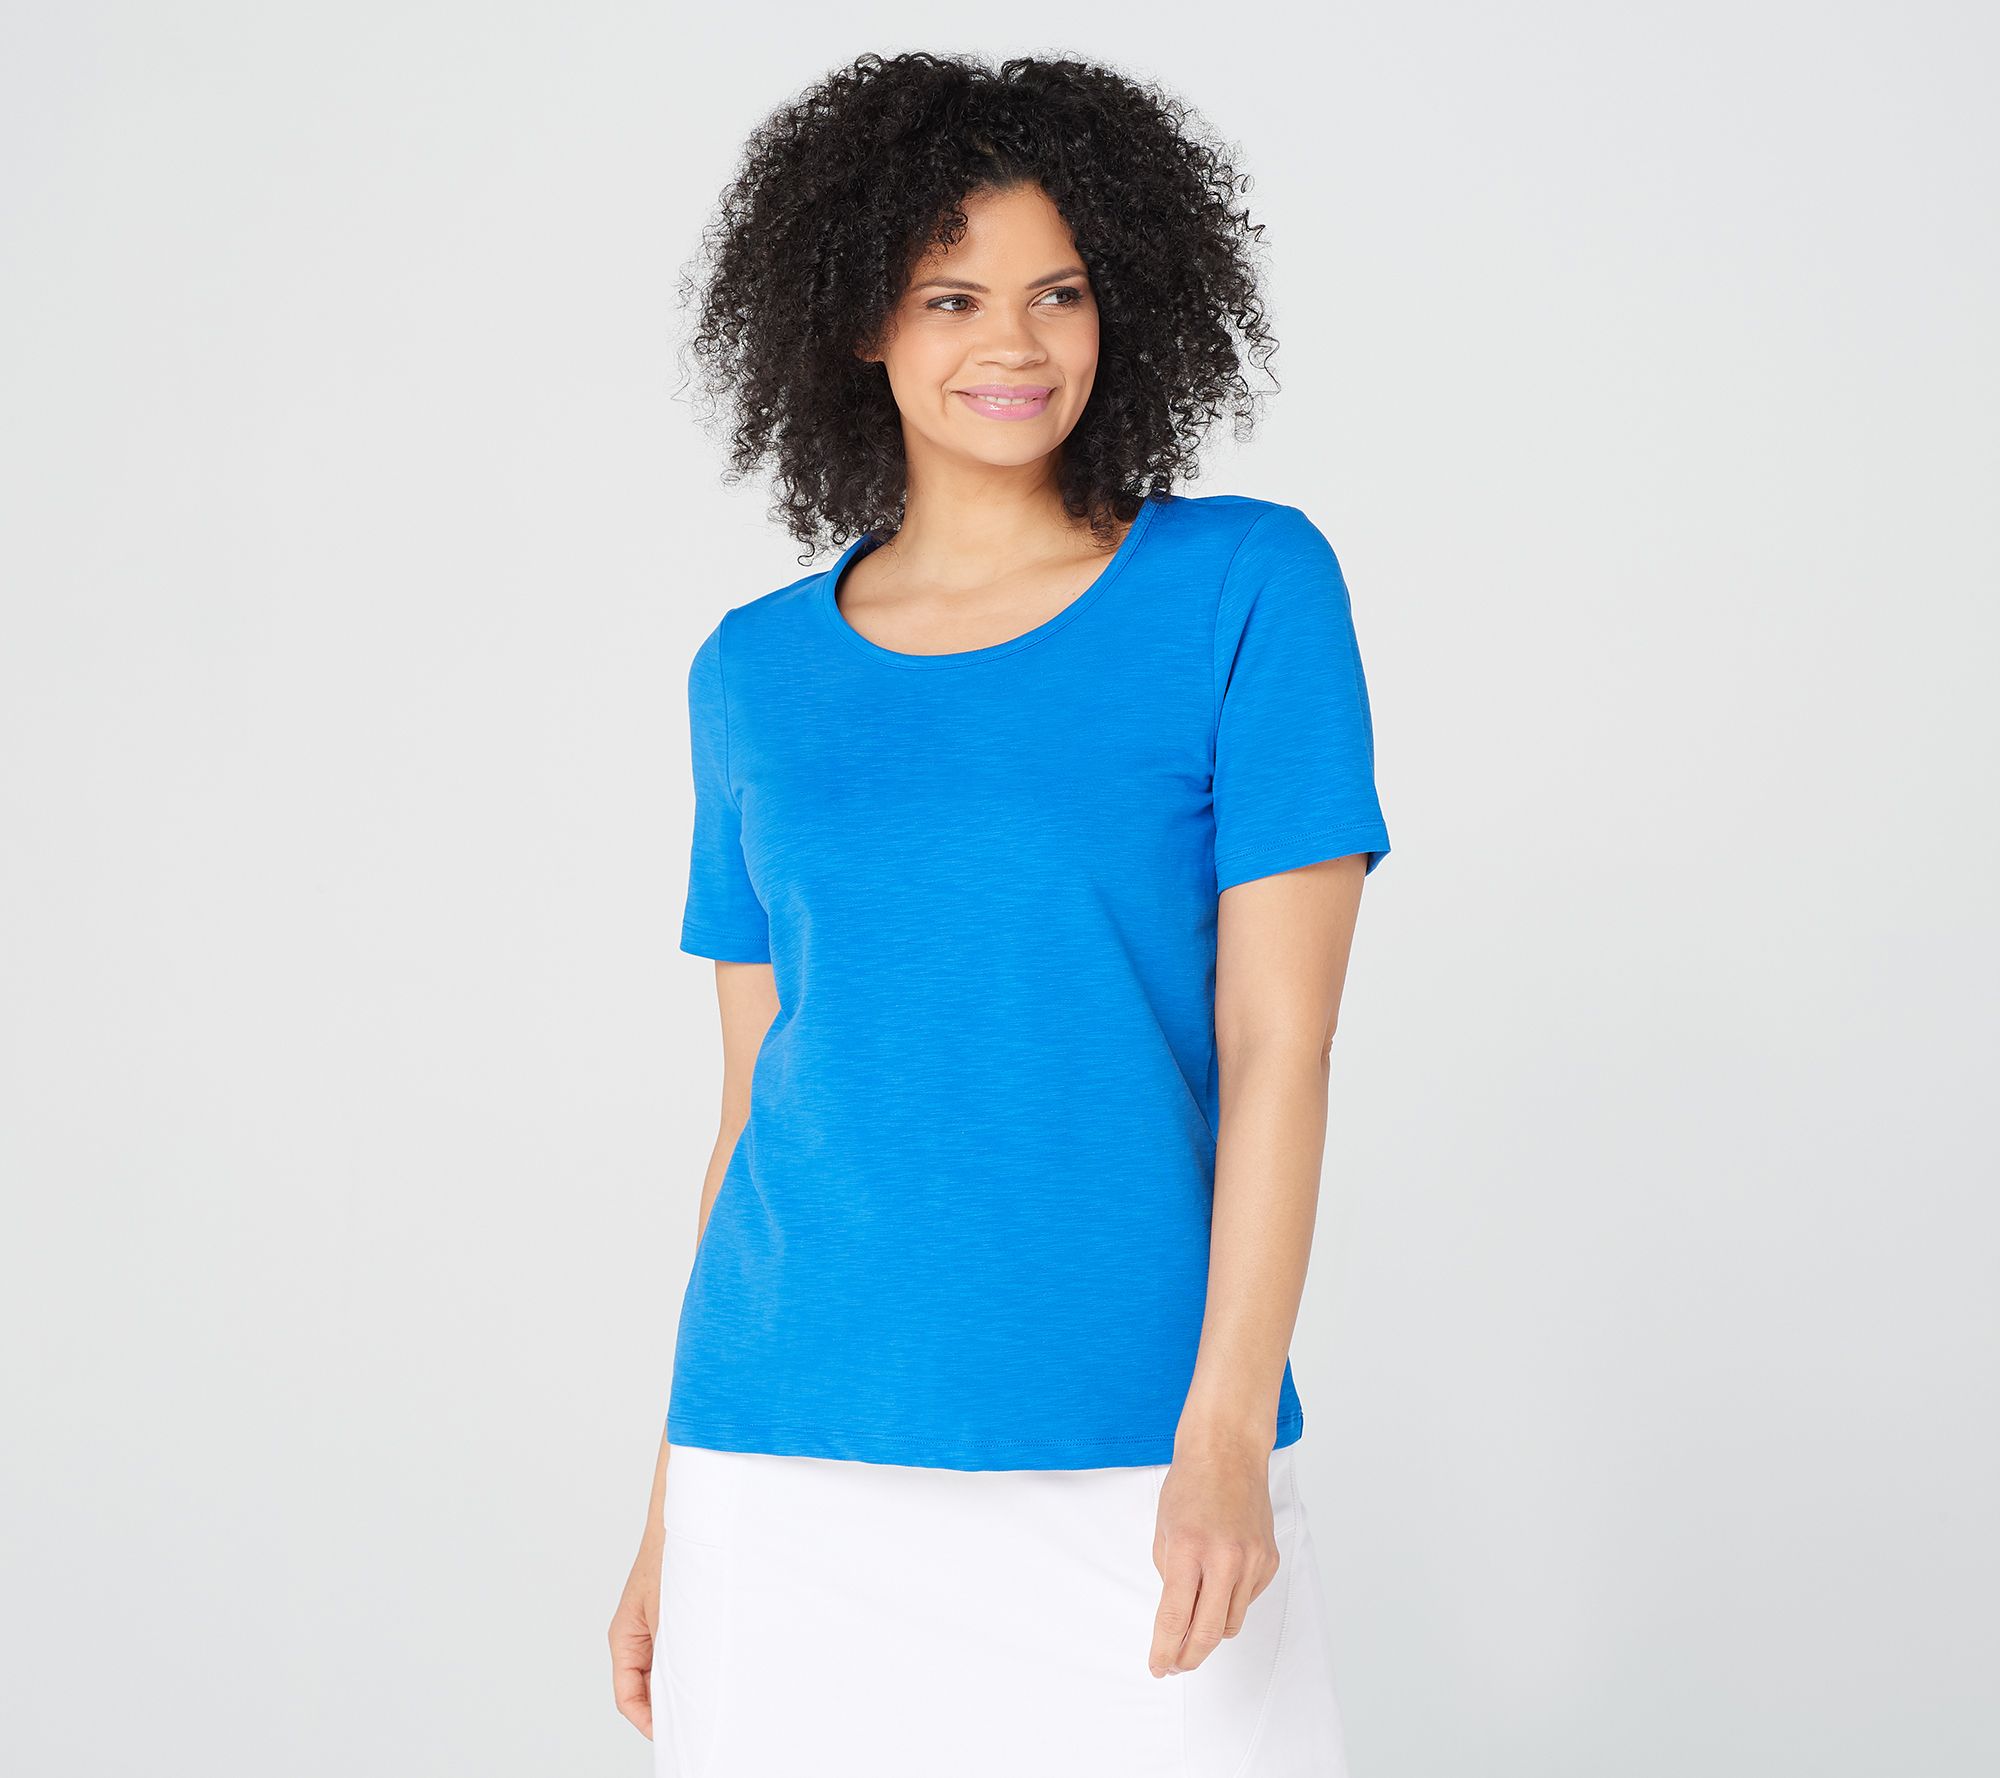 Denim & Co. Active Textured French Terry Short-Sleeve Top - QVC.com